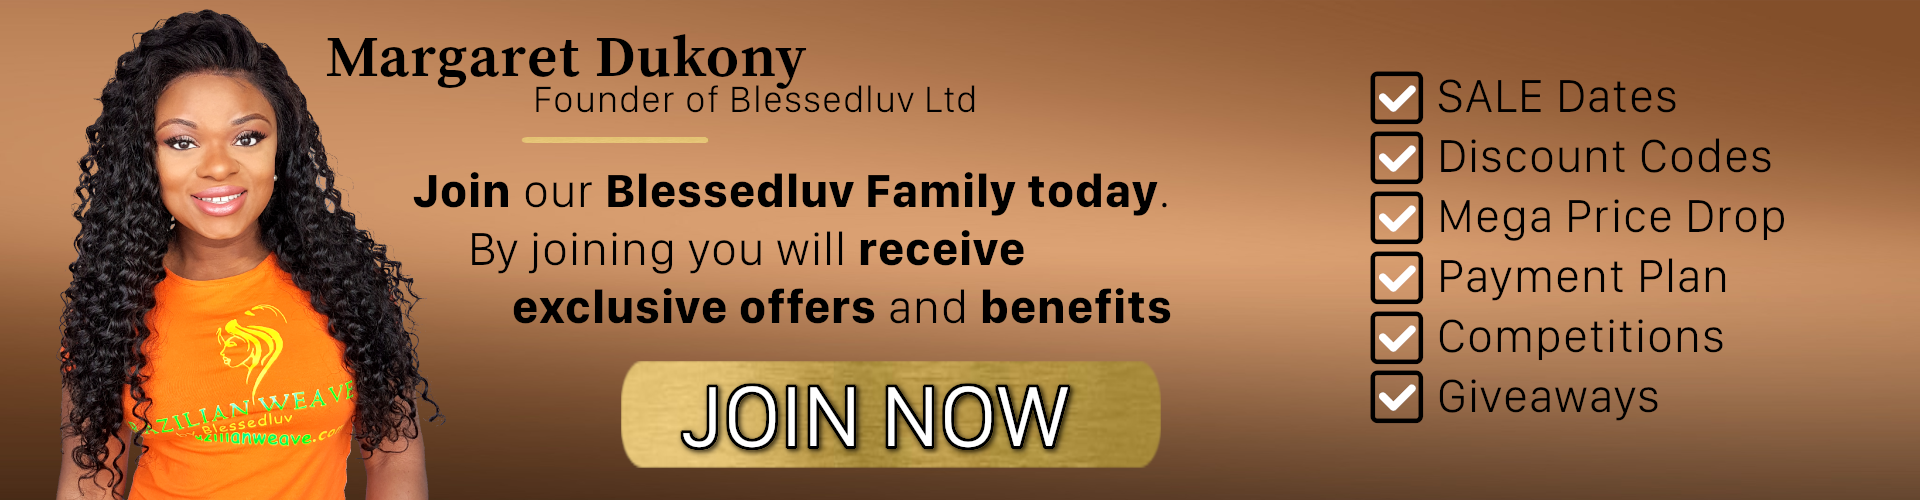 Join-NOW-Blessedluv-Landing-Page